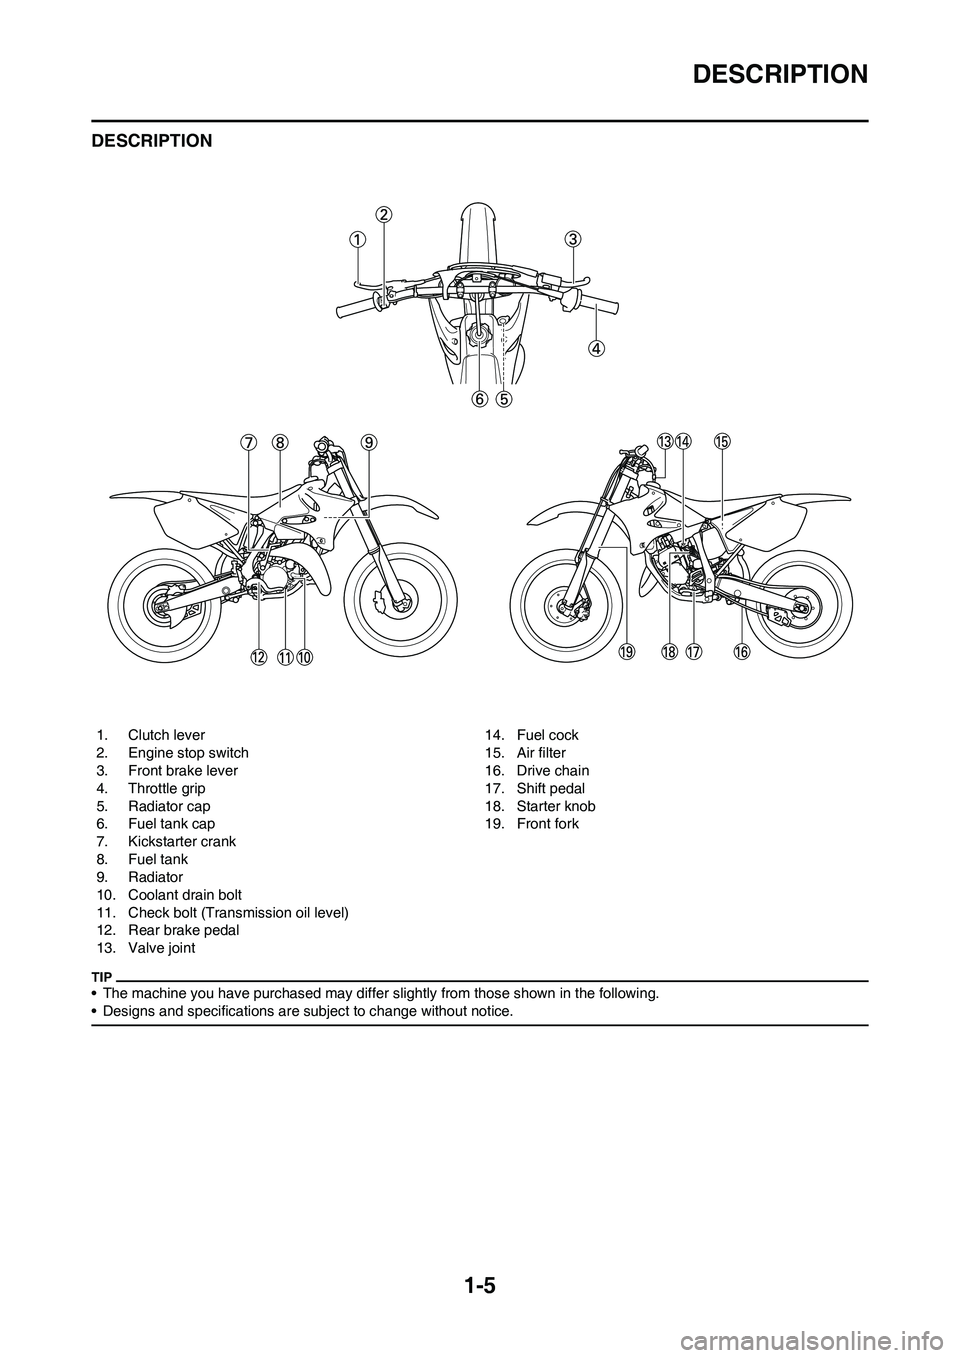 YAMAHA YZ125LC 2010  Owners Manual 1-5
DESCRIPTION
DESCRIPTION
• The machine you have purchased may differ slightly from those shown in the following.
• Designs and specifications are subject to change without notice.
1. Clutch lev